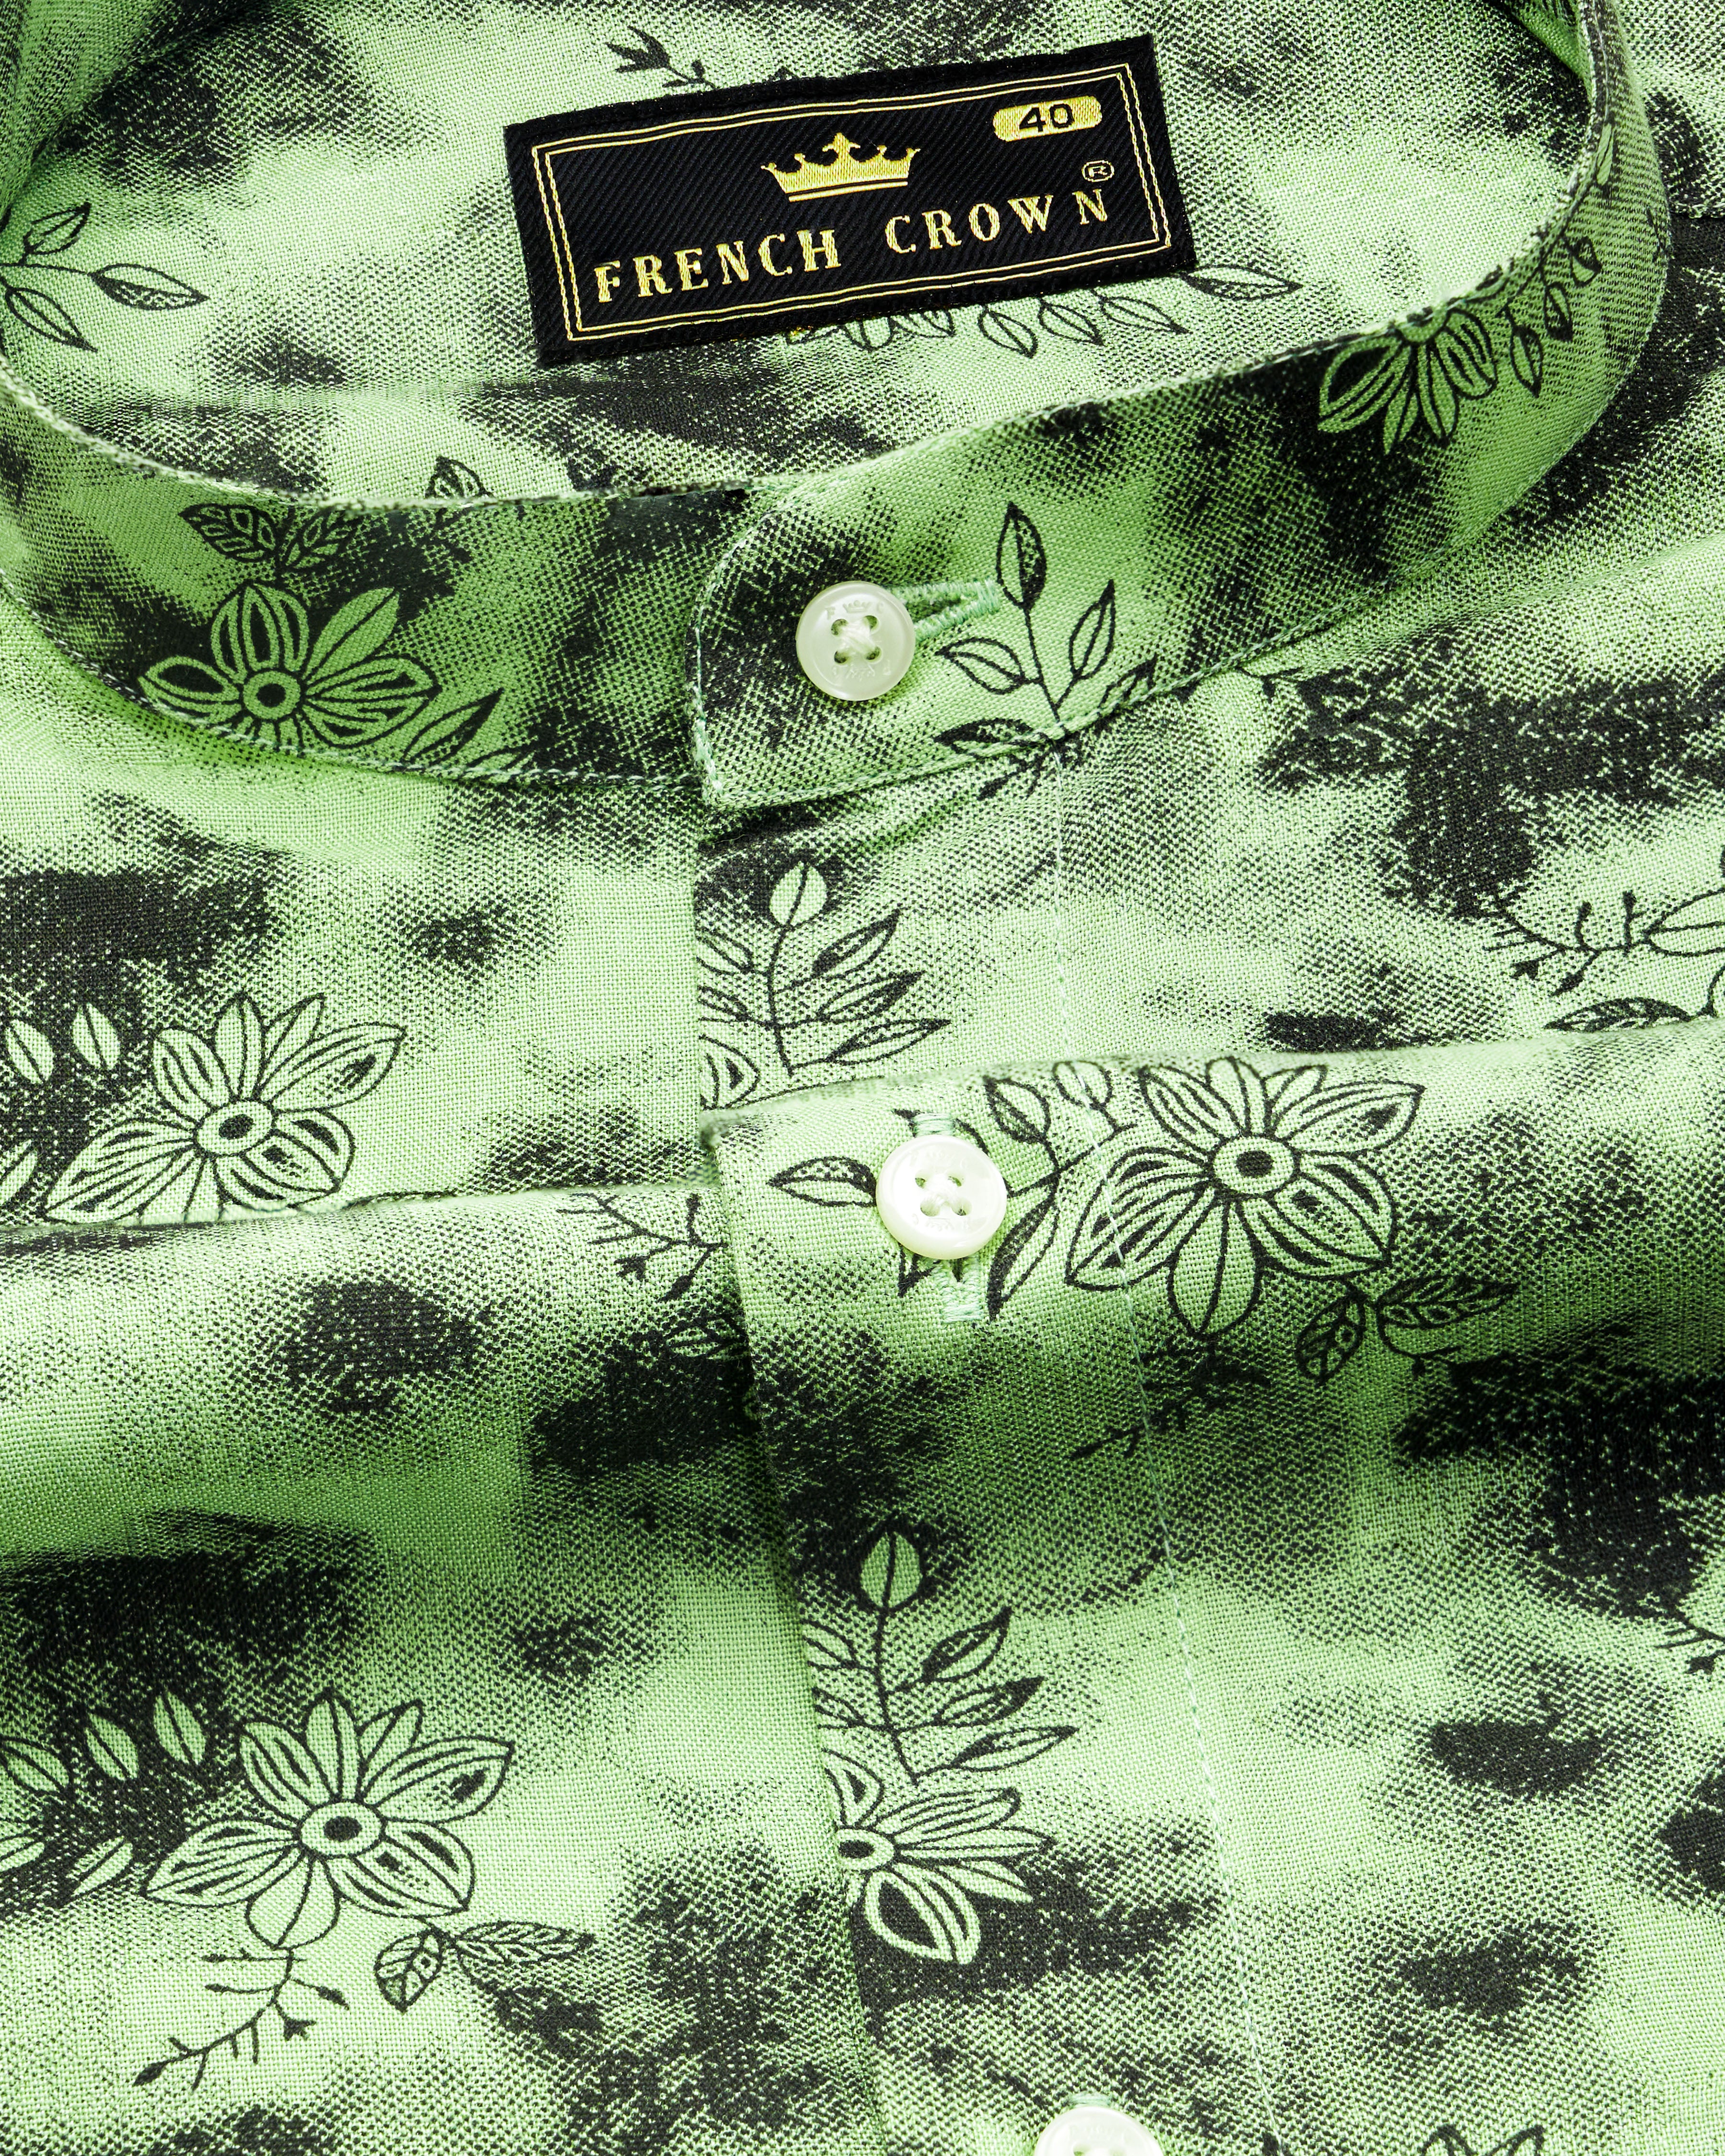 Coriander Green and Black Floral Textured Premium Tencel Shirt 10001-M-38, 10001-M-H-38, 10001-M-39, 10001-M-H-39, 10001-M-40, 10001-M-H-40, 10001-M-42, 10001-M-H-42, 10001-M-44, 10001-M-H-44, 10001-M-46, 10001-M-H-46, 10001-M-48, 10001-M-H-48, 10001-M-50, 10001-M-H-50, 10001-M-52, 10001-M-H-52